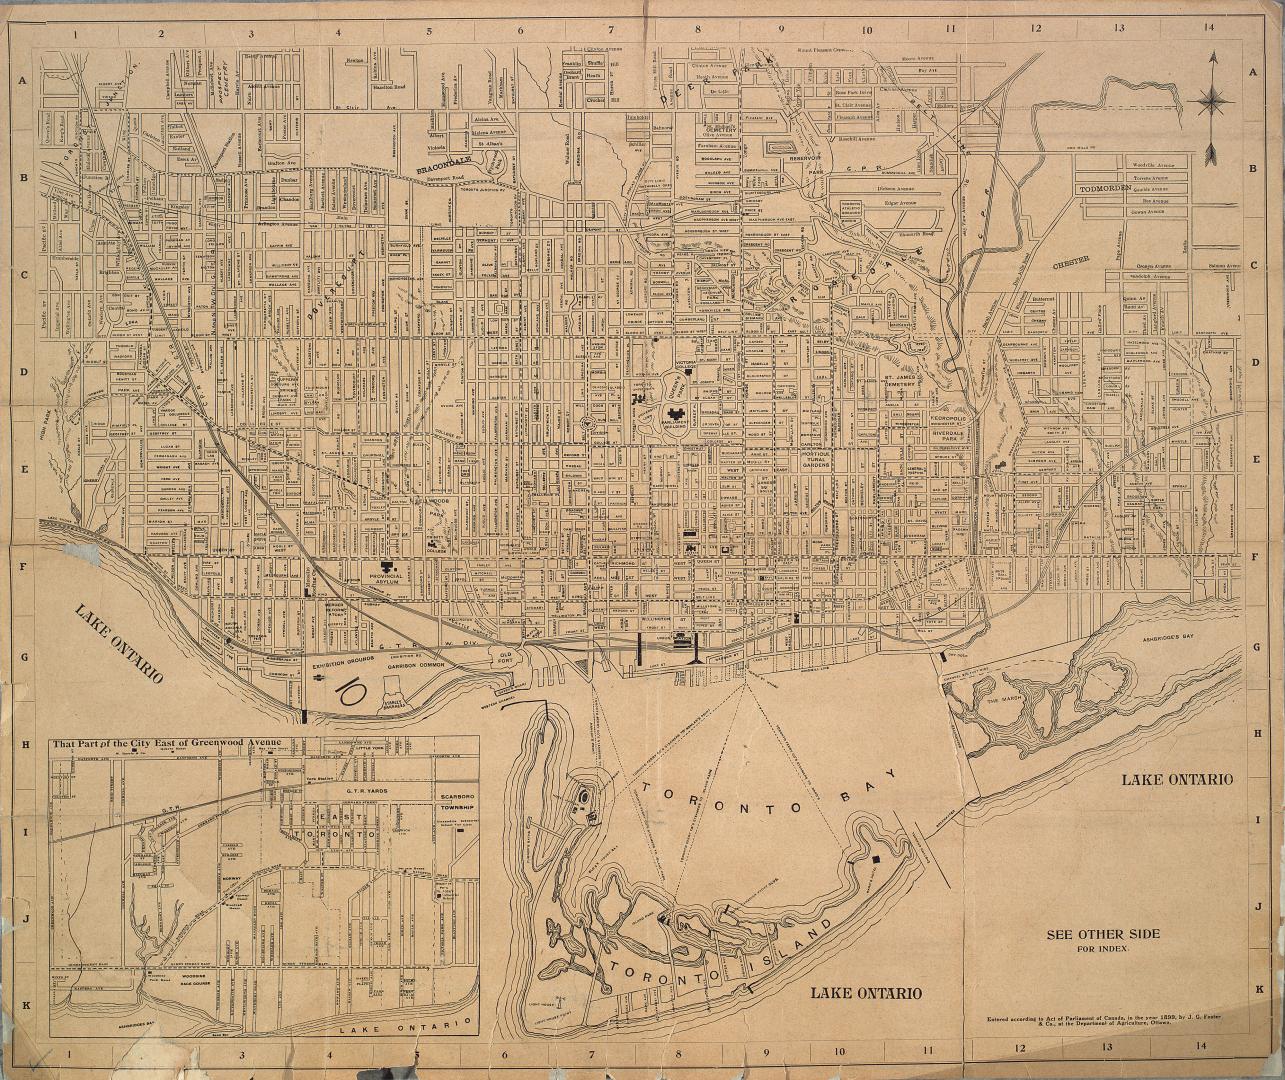 Foster's map of Toronto